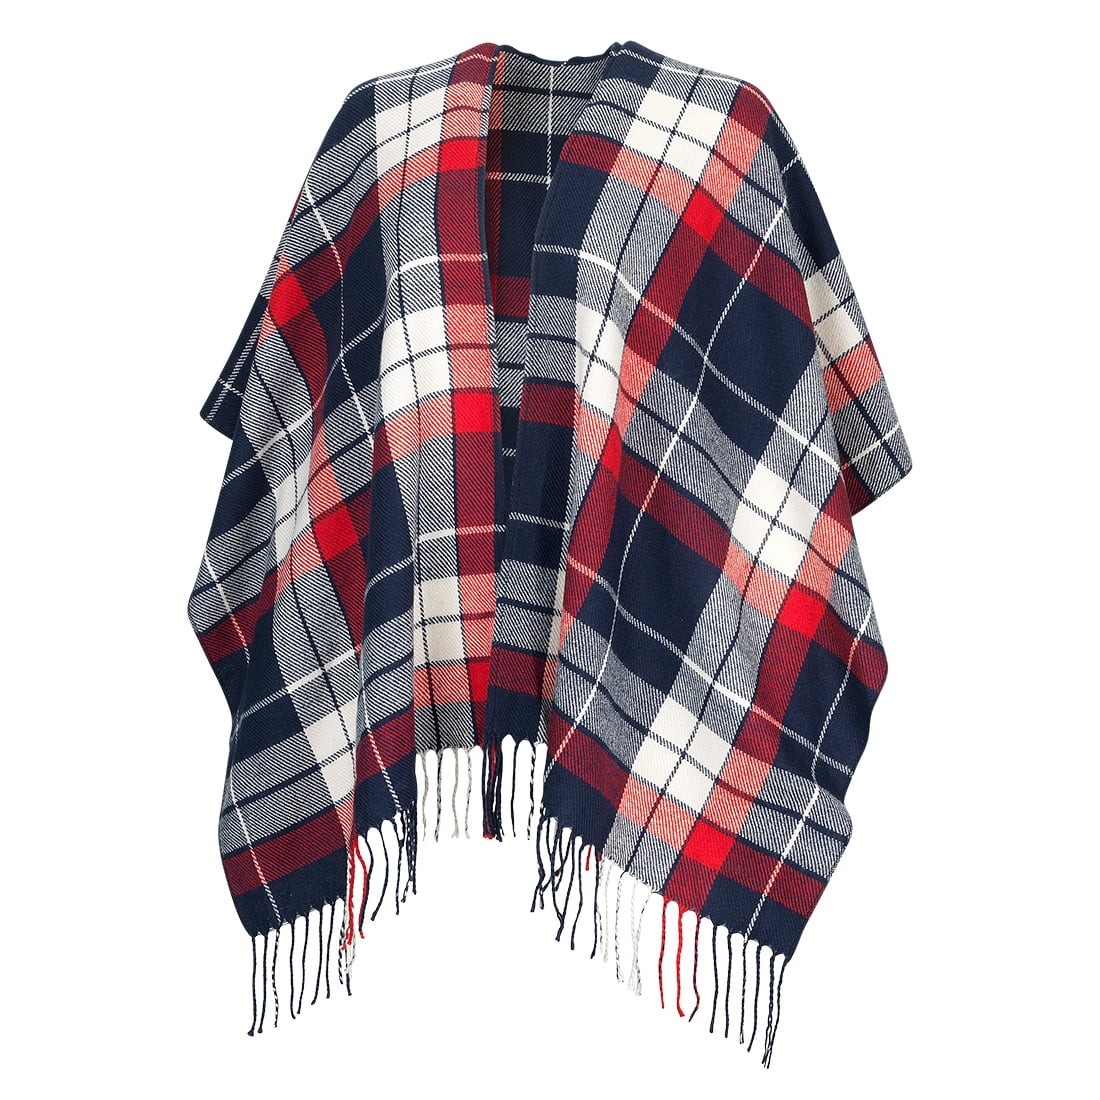 Red and Navy Plaid Kennedy Shawl - CLOSEOUT